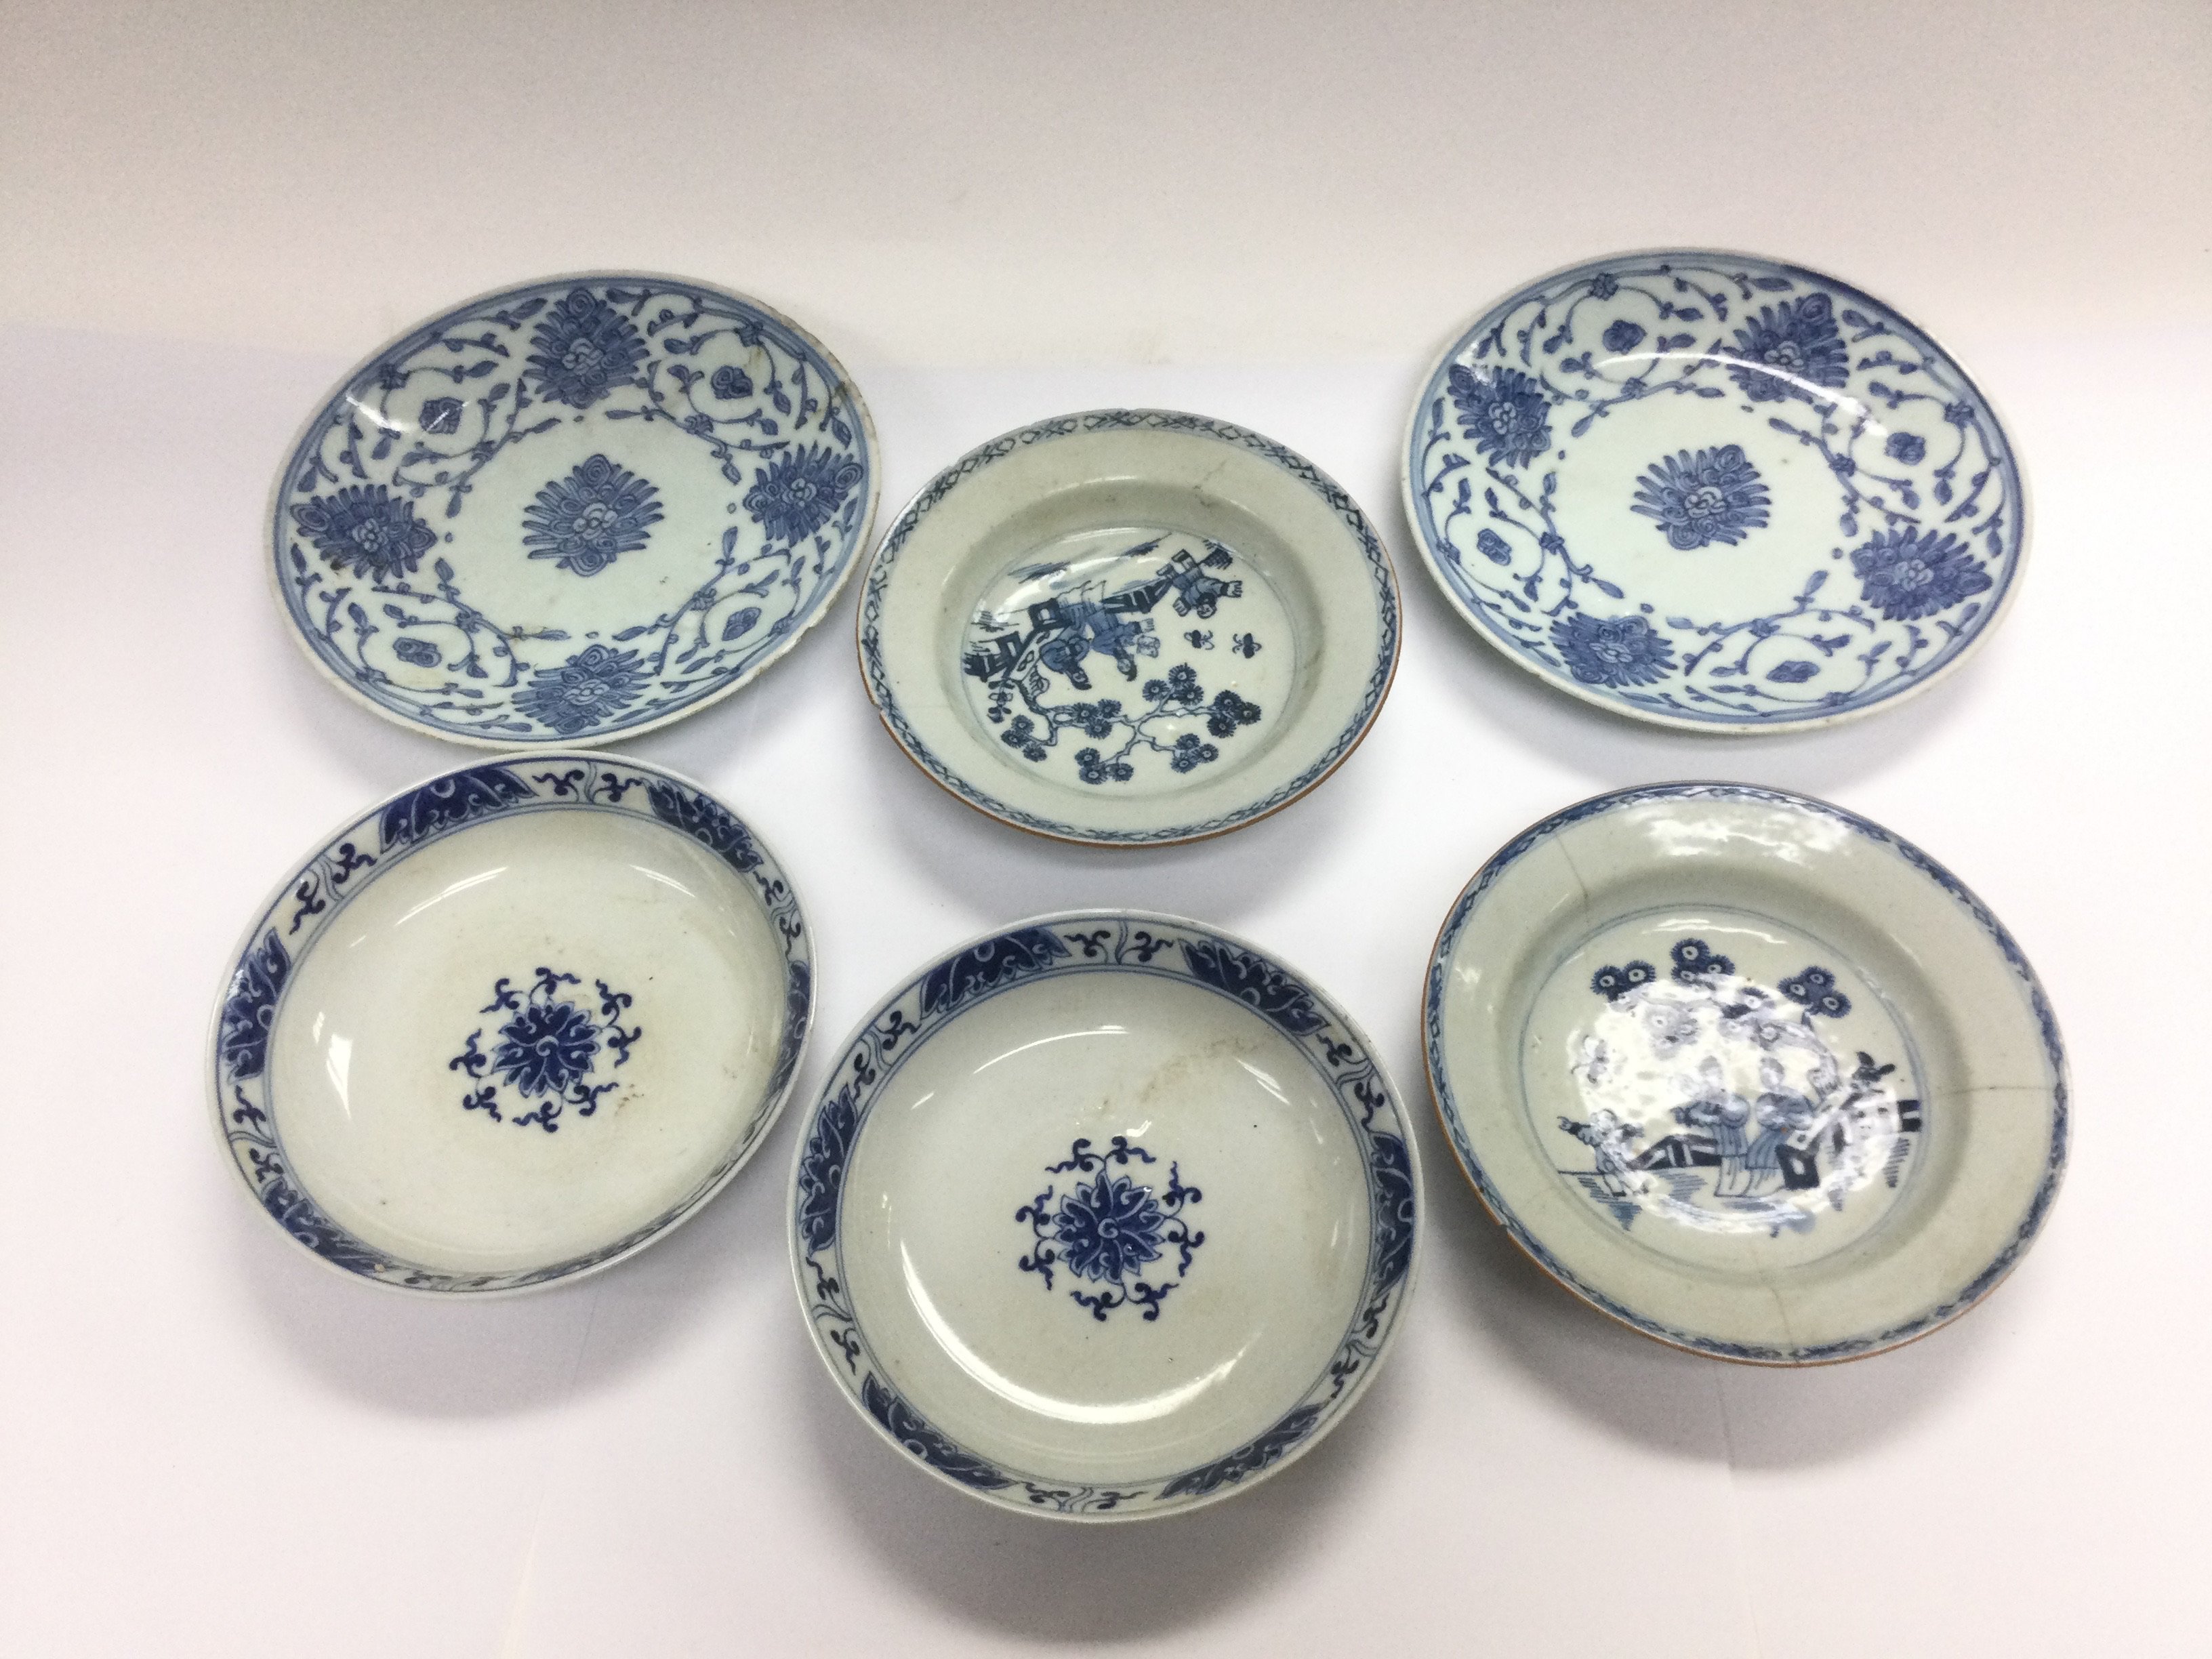 Six blue and white dishes, largest diameter approx